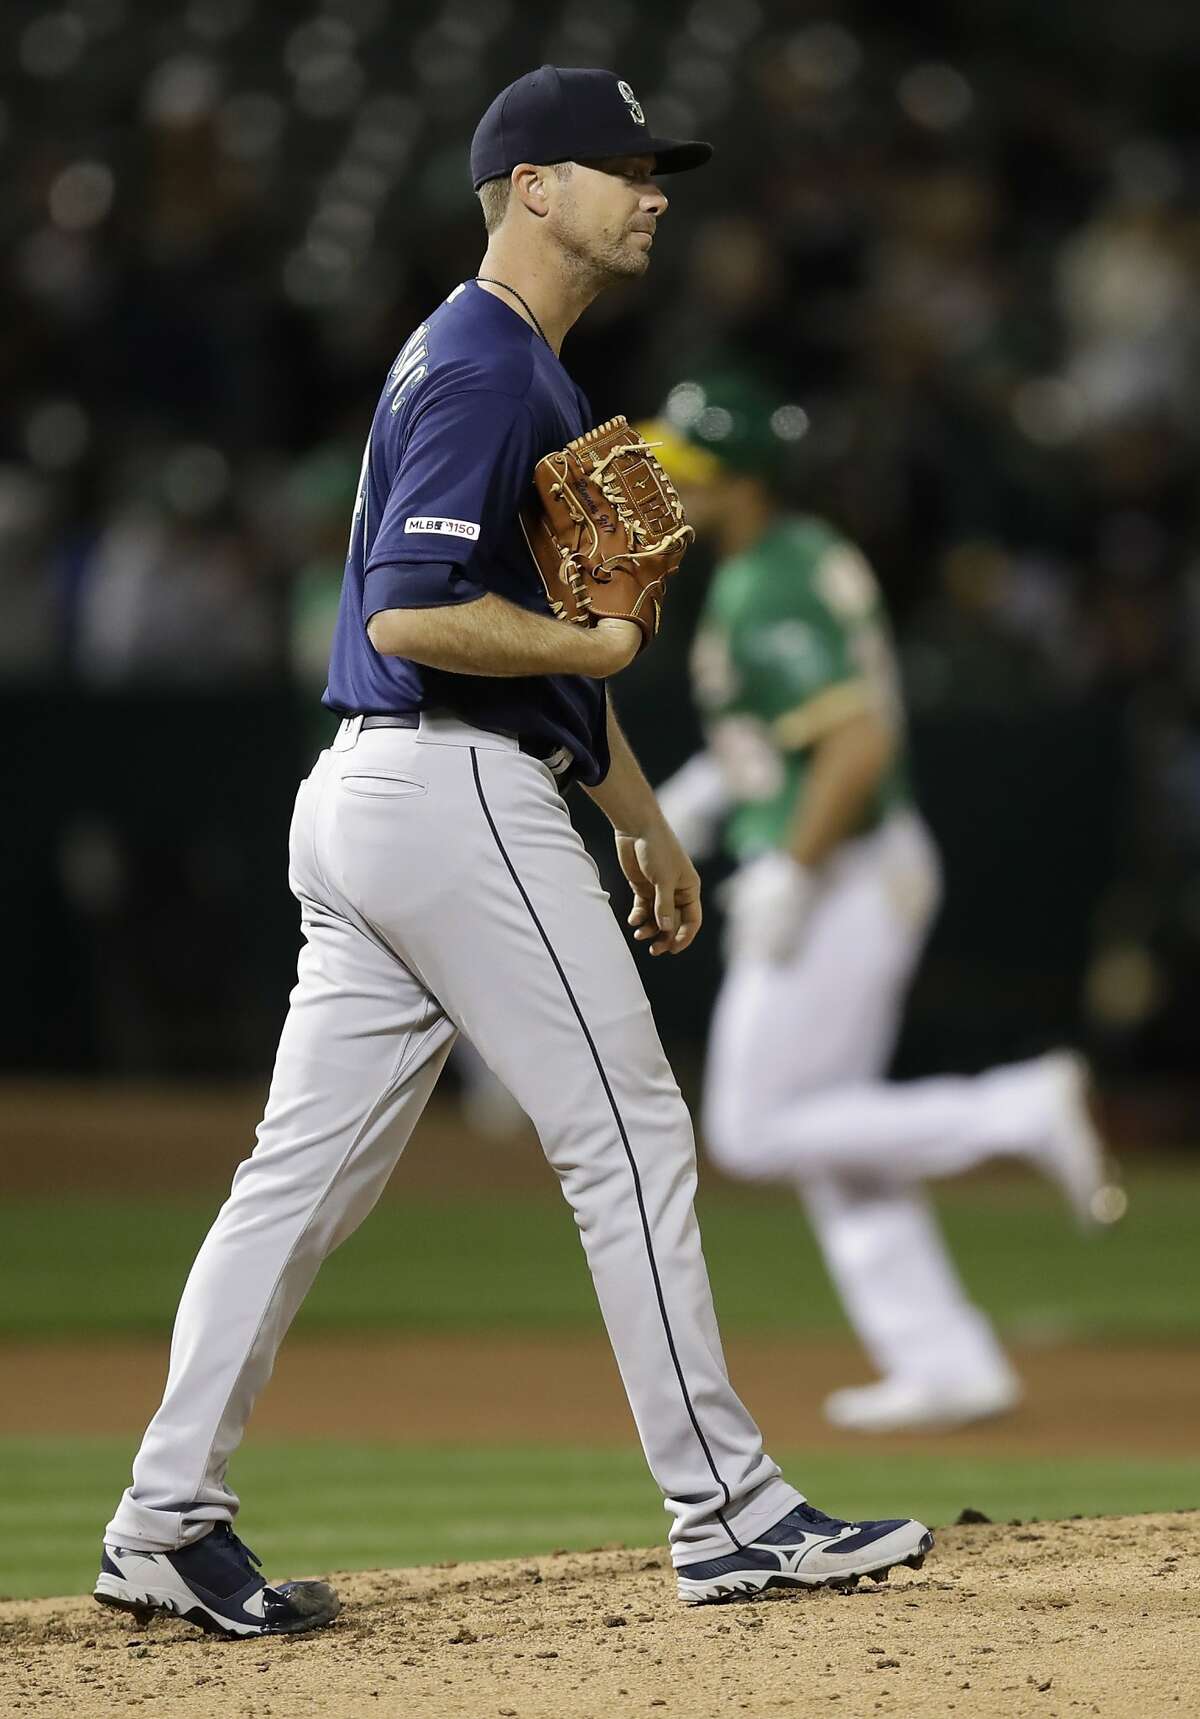 Seattle Mariners' Wade LeBlanc walks back on the mound after giving up a three-run home run to Oakland Athletics' Matt Olson, rear, during the fourth inning of a baseball game Friday, May 24, 2019, in Oakland, Calif. (AP Photo/Ben Margot)